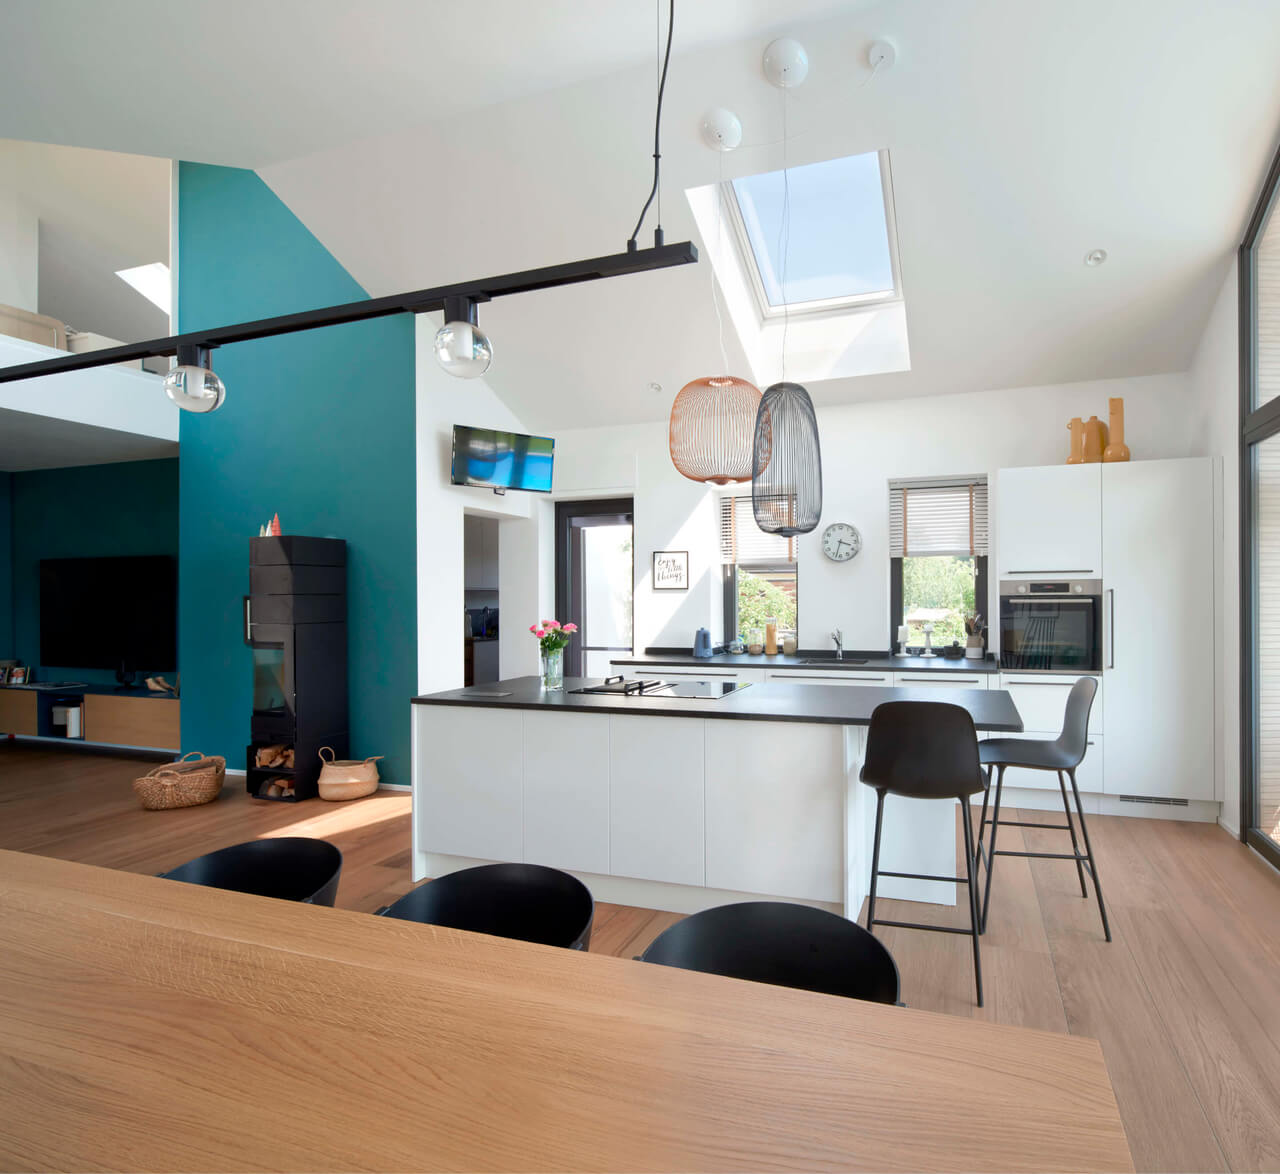 A bright kitchen and dining room area with a roof window